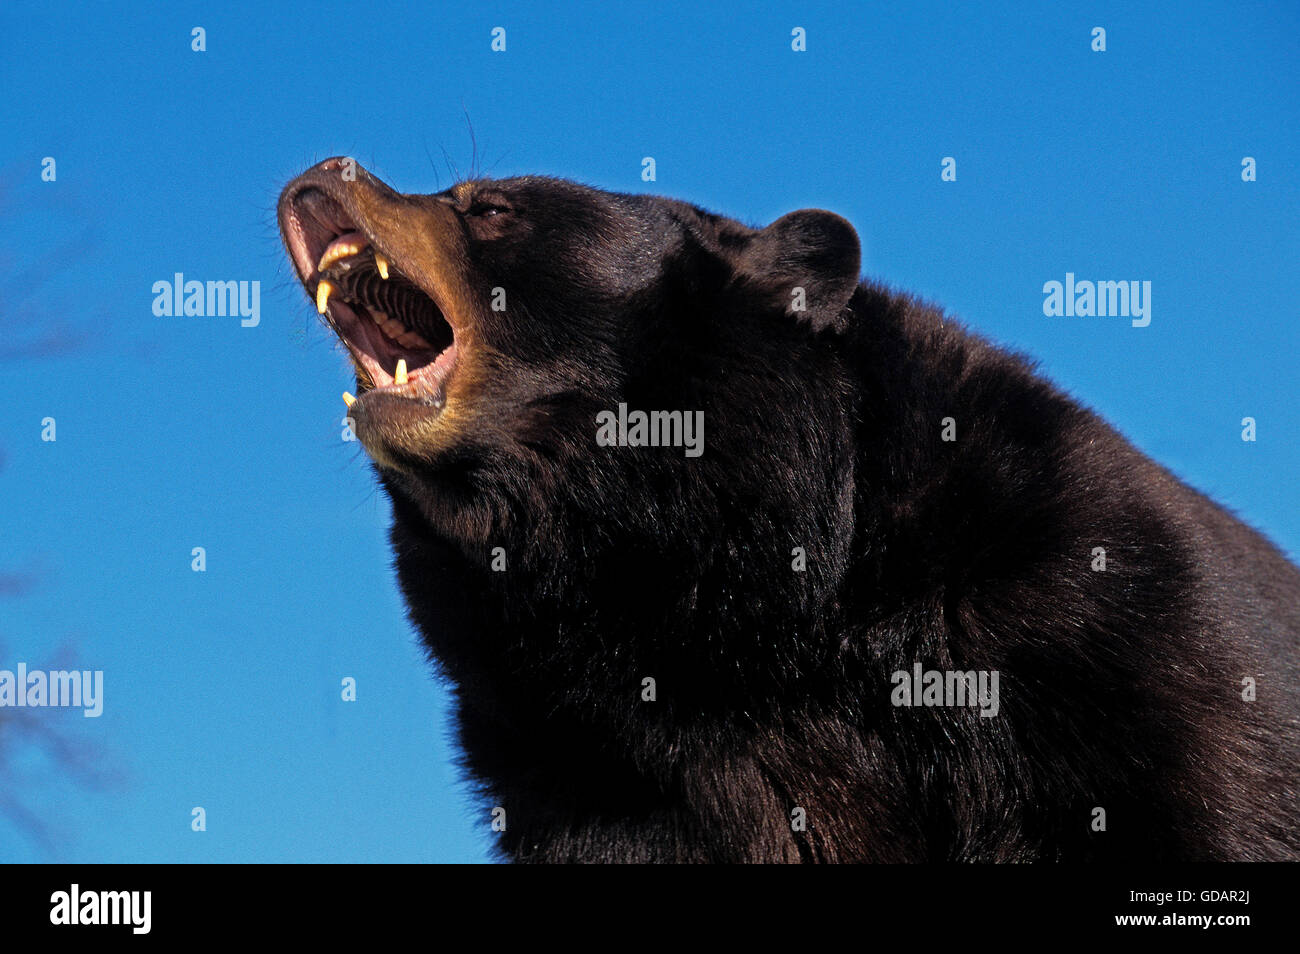 American Black Bear, ursus americanus, Adult with Open Mouth, in Defensive Posture, Canada Stock Photo